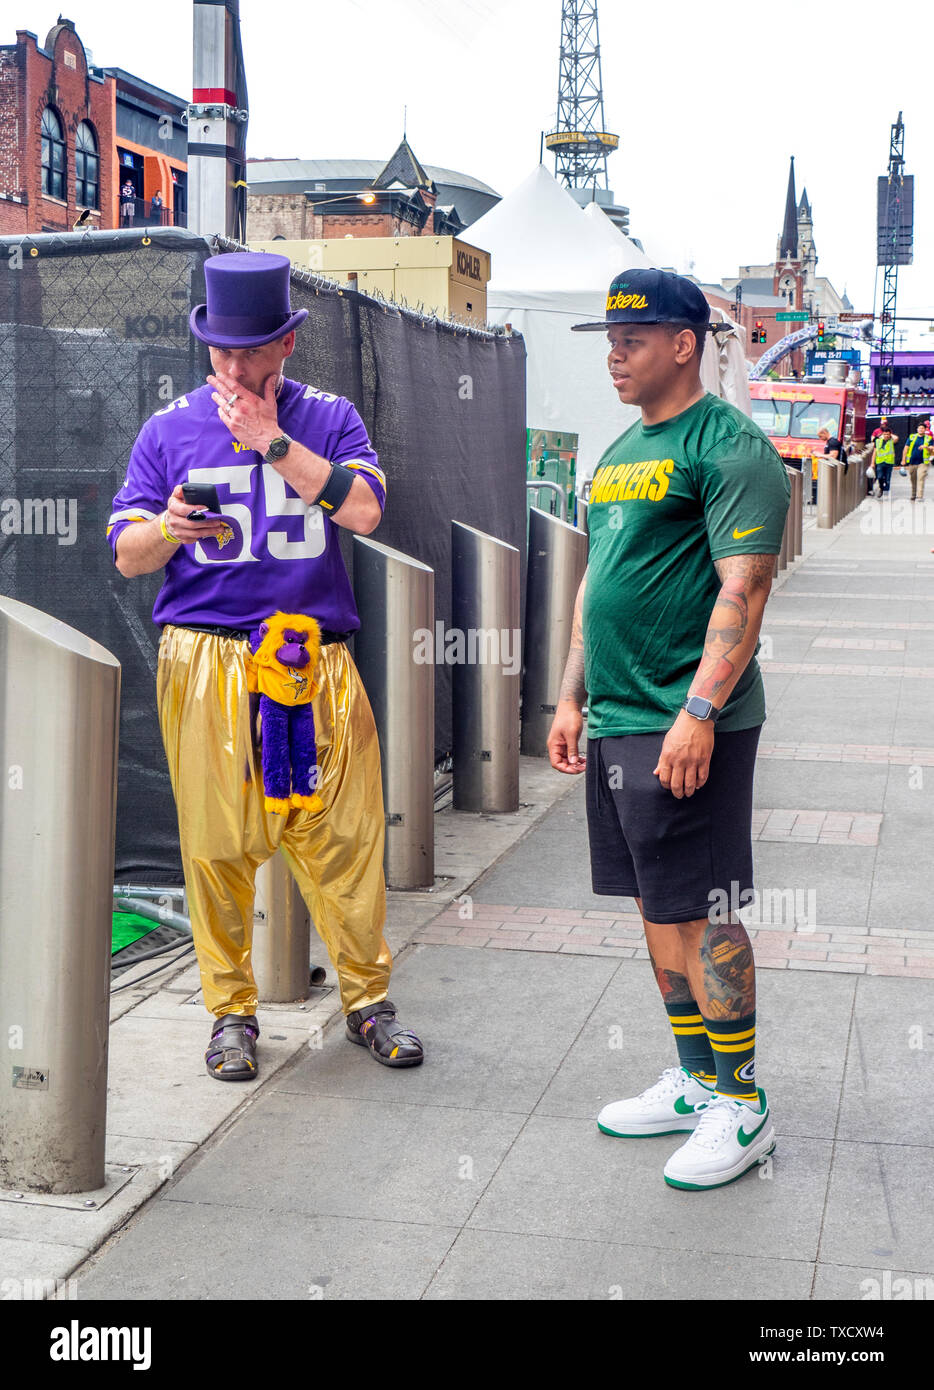 Minnesota Vikings and Green Bay Packers football fans on Broadway at NFL Draft 2019 Nashville Tennessee. Stock Photo